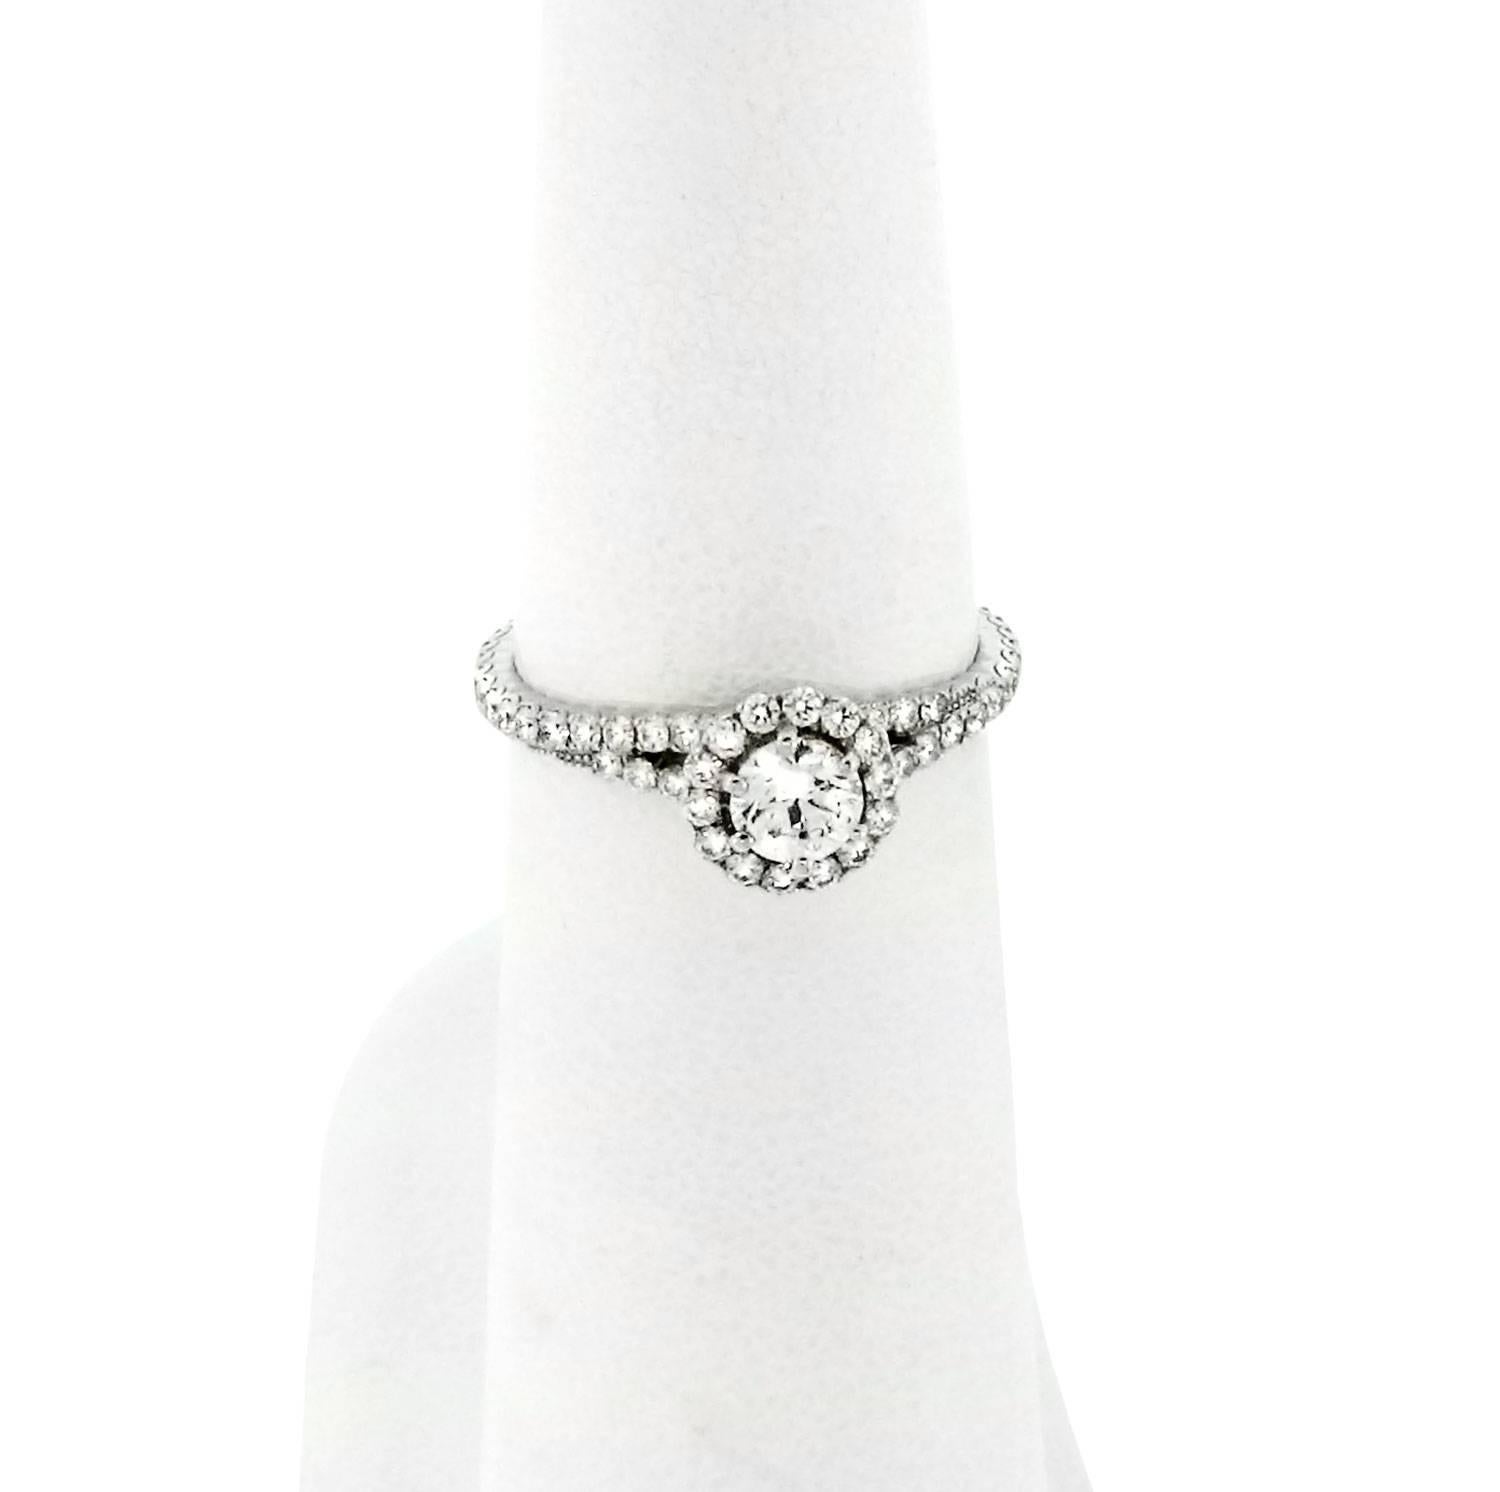 This platinum engagement ring is a masterful design with the highest quality of materials used in it's creation. White diamonds glitter from every angle and bring the focus to the round-cut center diamond. This ring boasts a unique design with what